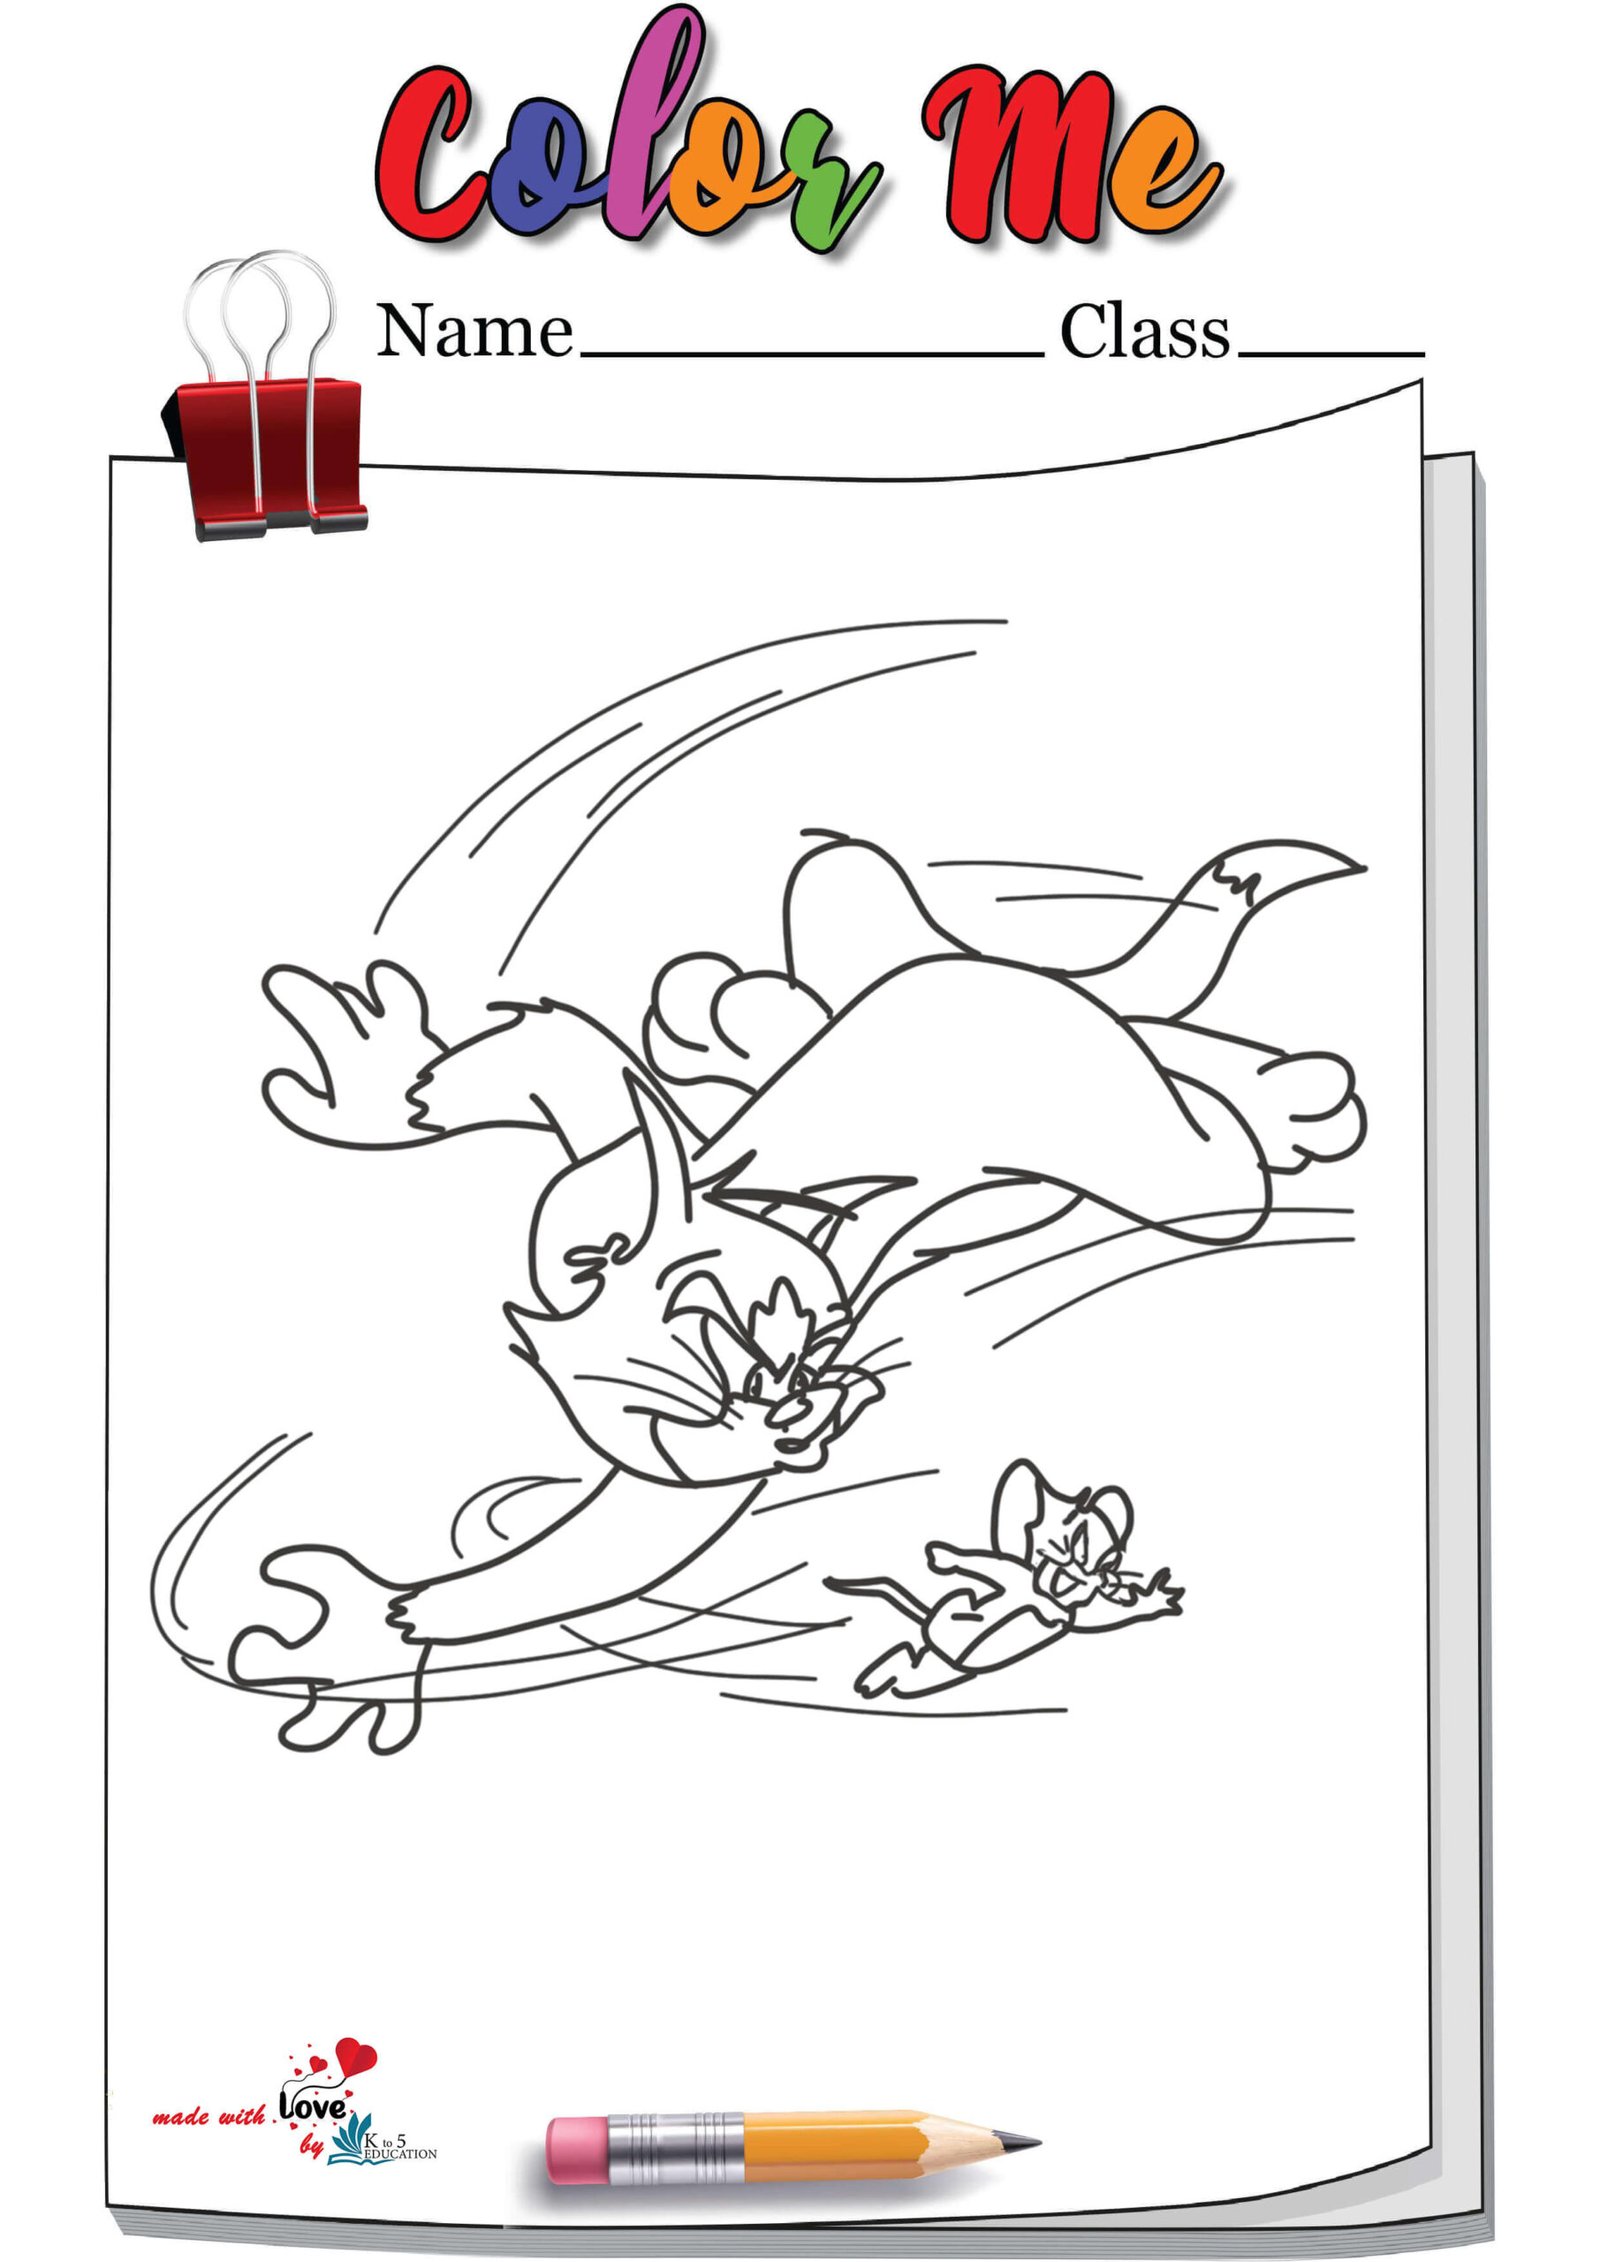 Tom And Jerry Cartoon Coloring Page